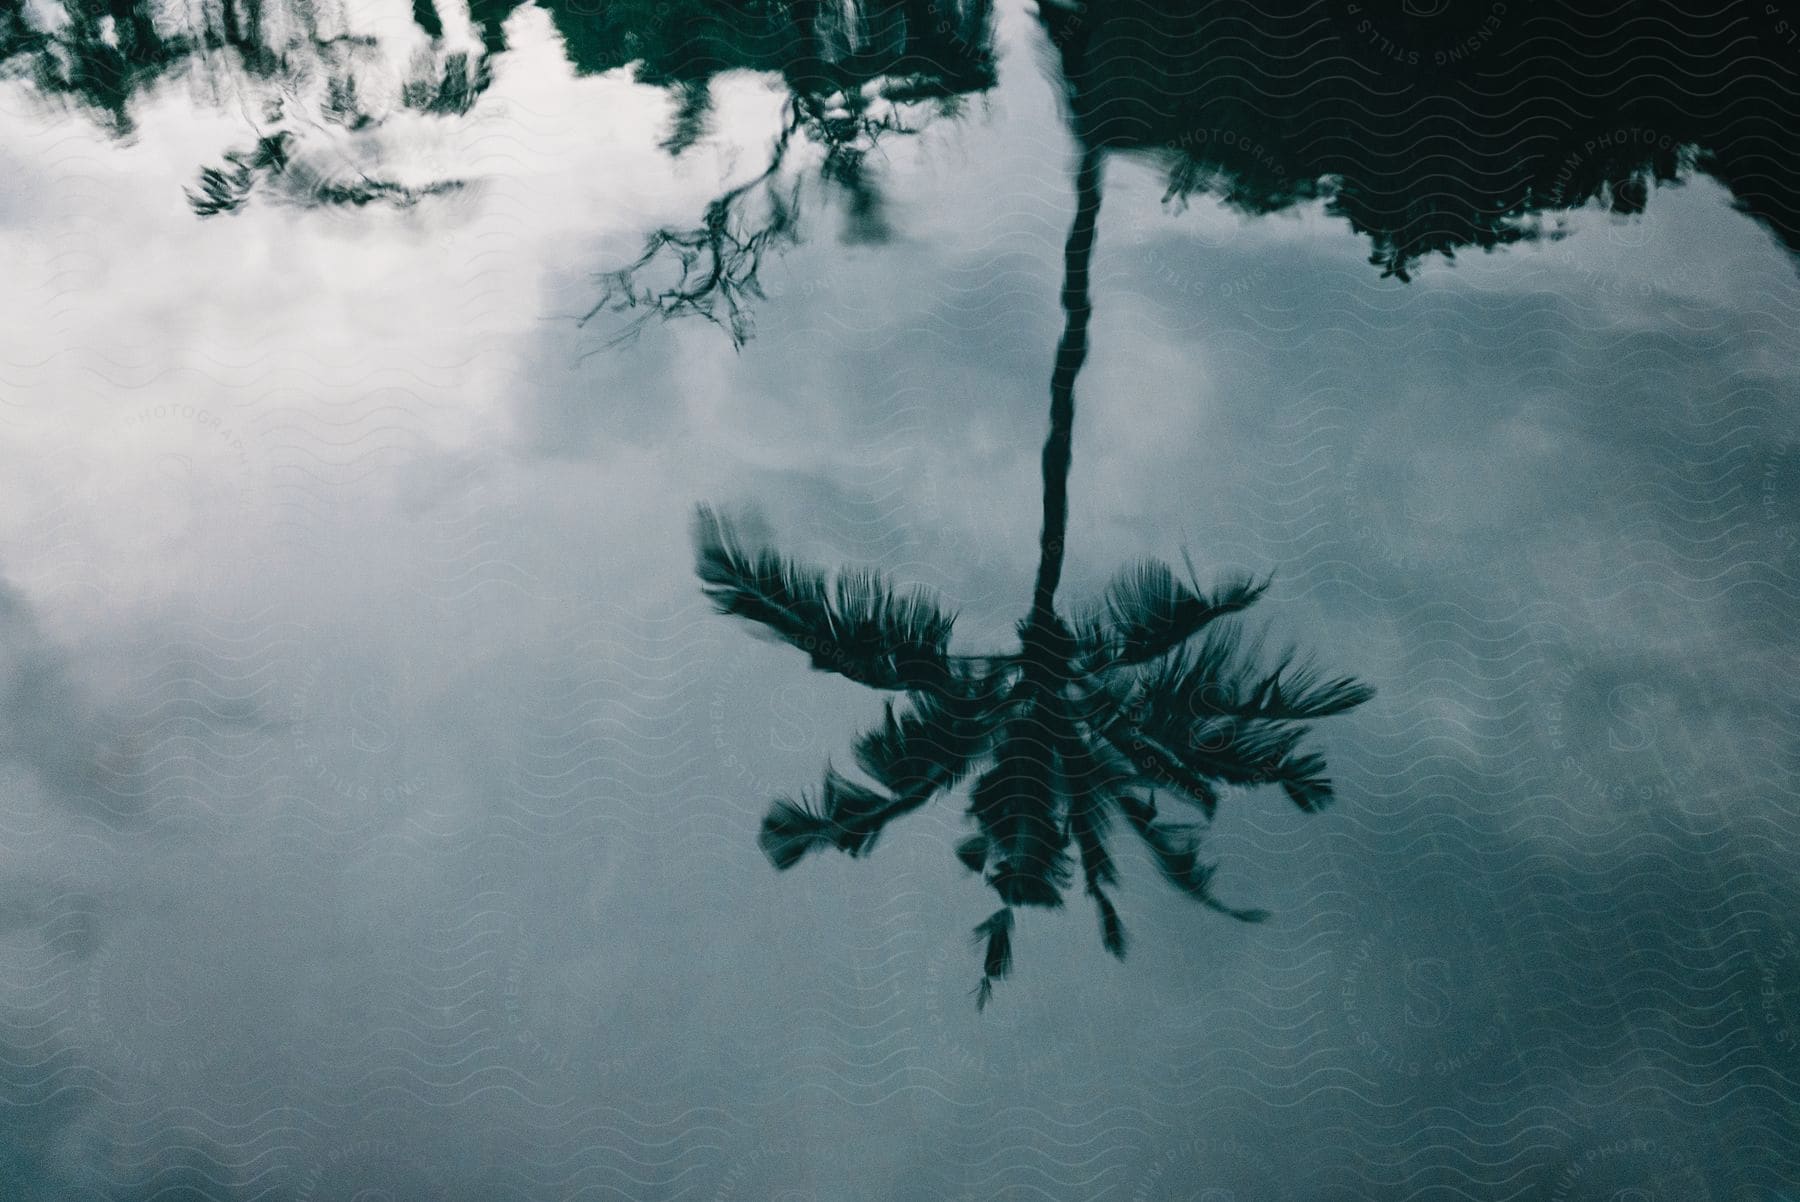 A palm trees reflection is seen on the surface of a pool mirroring the swaying fronds above